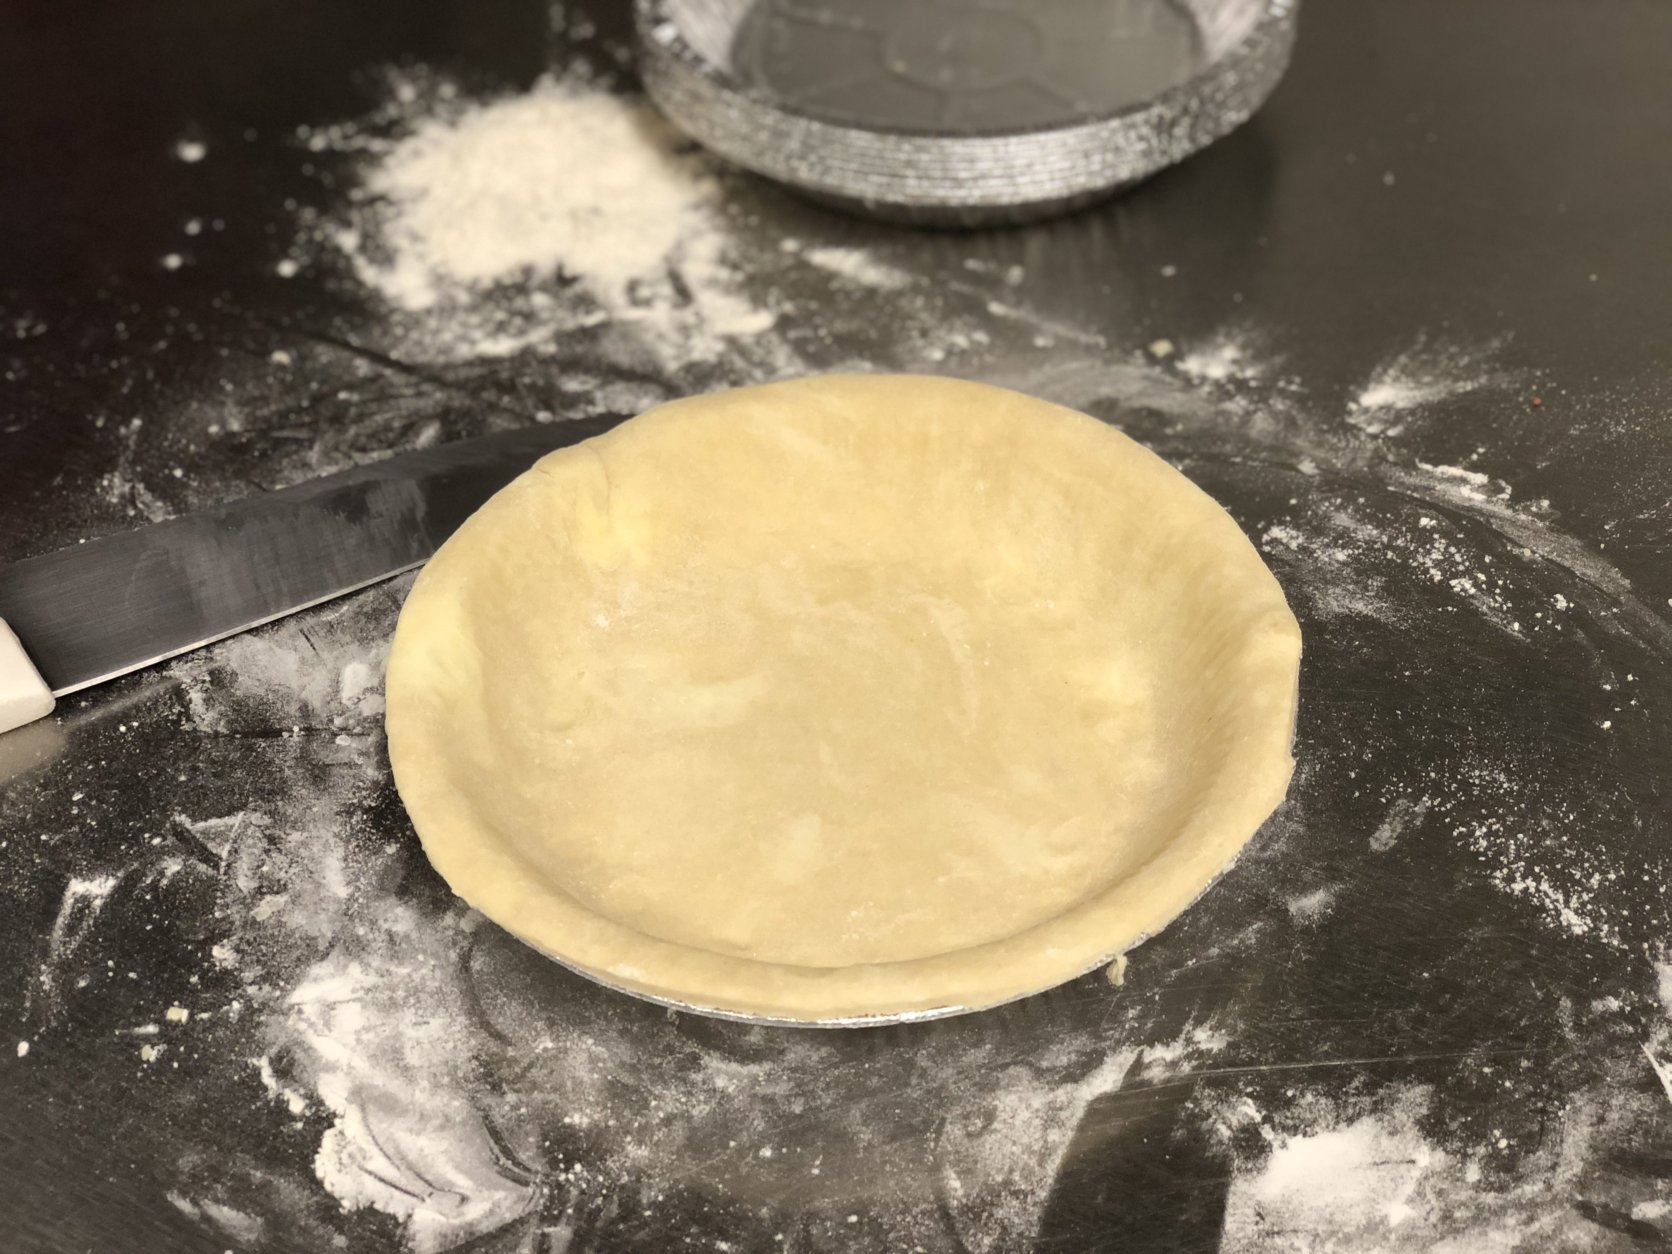 This year, skip the store-bought shells. Lauren Parlato, head baker at D.C.’s Little Red Fox, shares her recipe — and tips — for making a simple pie crust at home. (WTOP/Rachel Nania) 